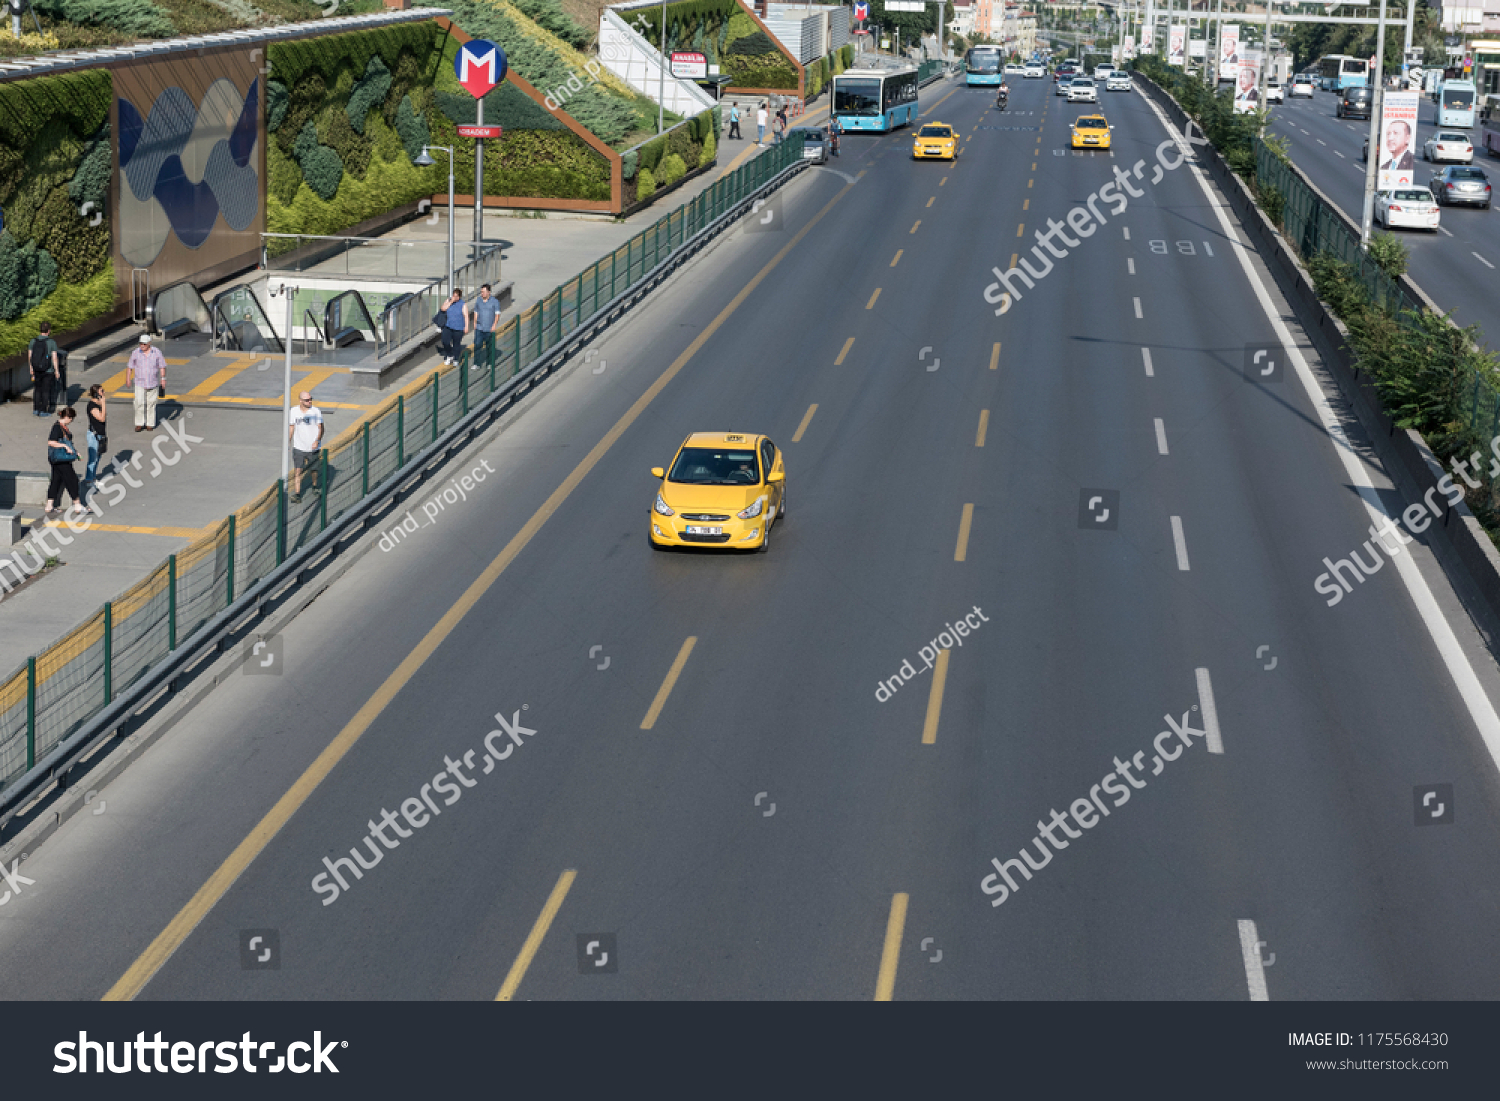 ISTANBUL, TURKEY - AUGUST 4: Turkish taxi on the way, August 30, 2018 in Istanbul. 22,000 Istanbul taxi routes are on duty. #1175568430